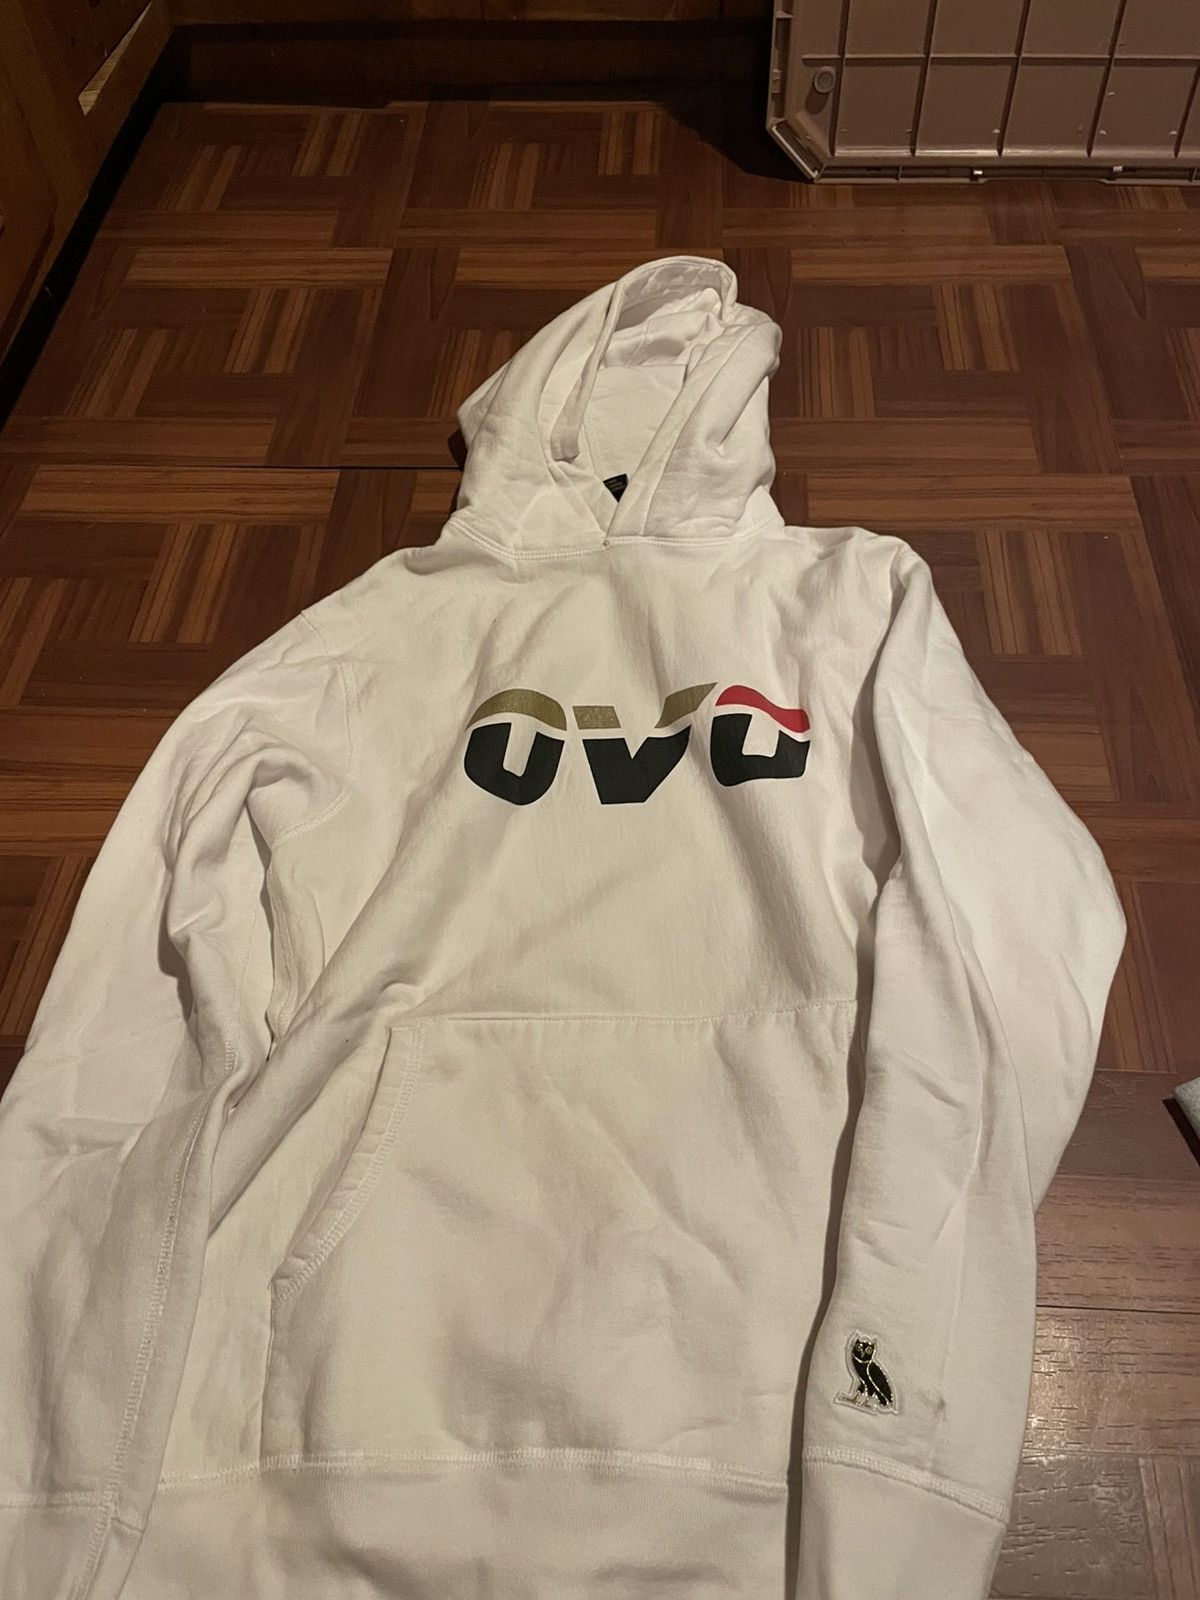 Octobers Very Own Ovo hoodie size large Size US L / EU 52-54 / 3 - 1 Preview